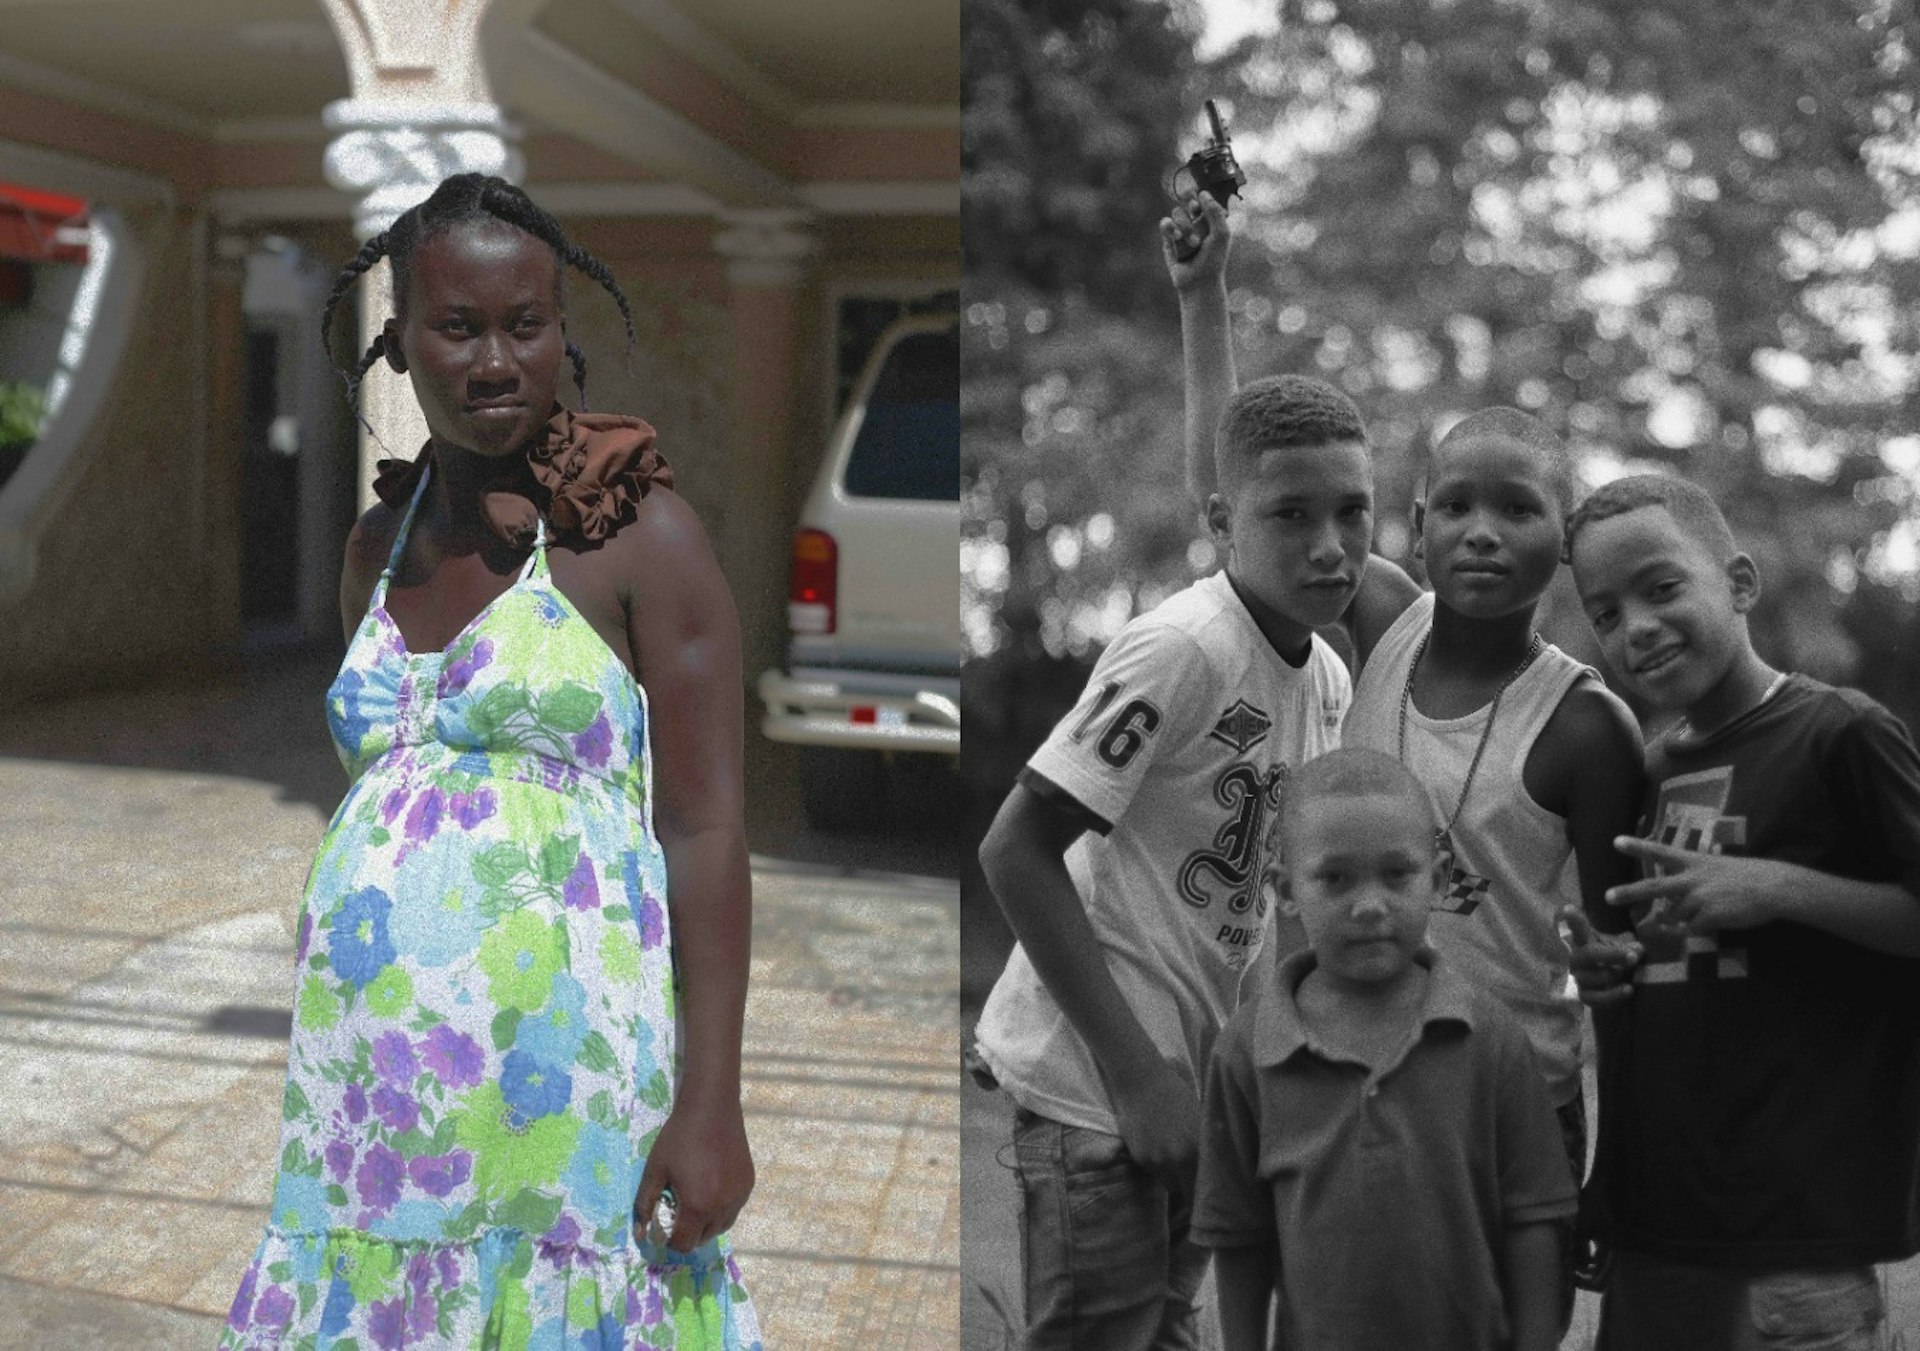 Capturing race and colour in the Dominican Republic